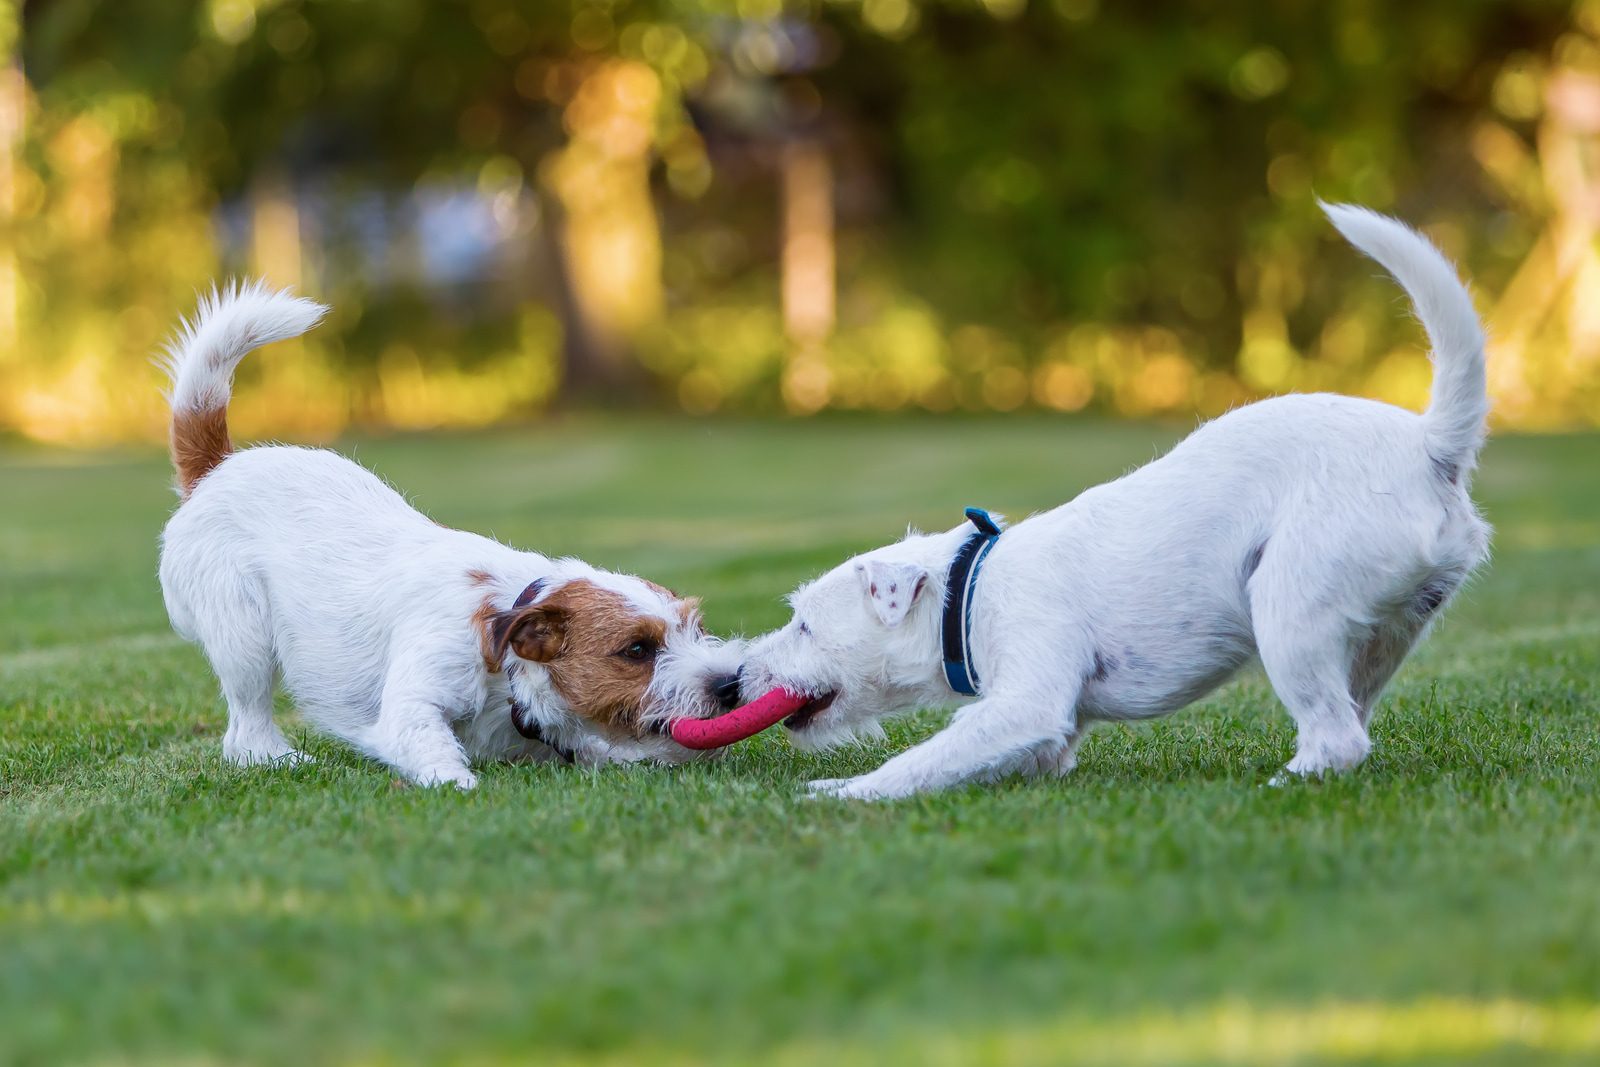 Is your dog playing too aggressively?